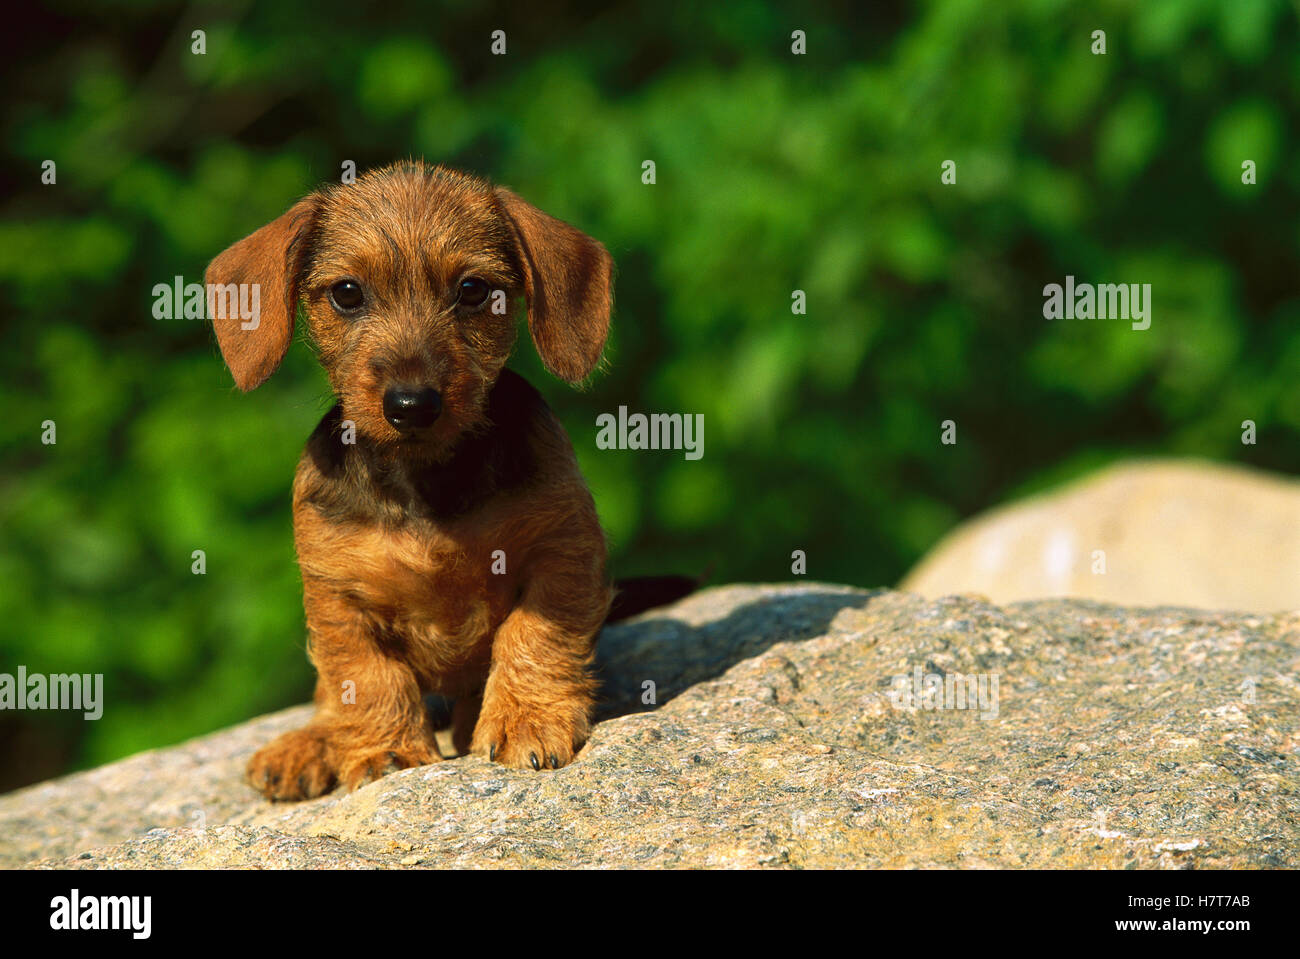 Miniature Wire-haired Dachshund (Canis familiaris) puppy portrait Stock Photo